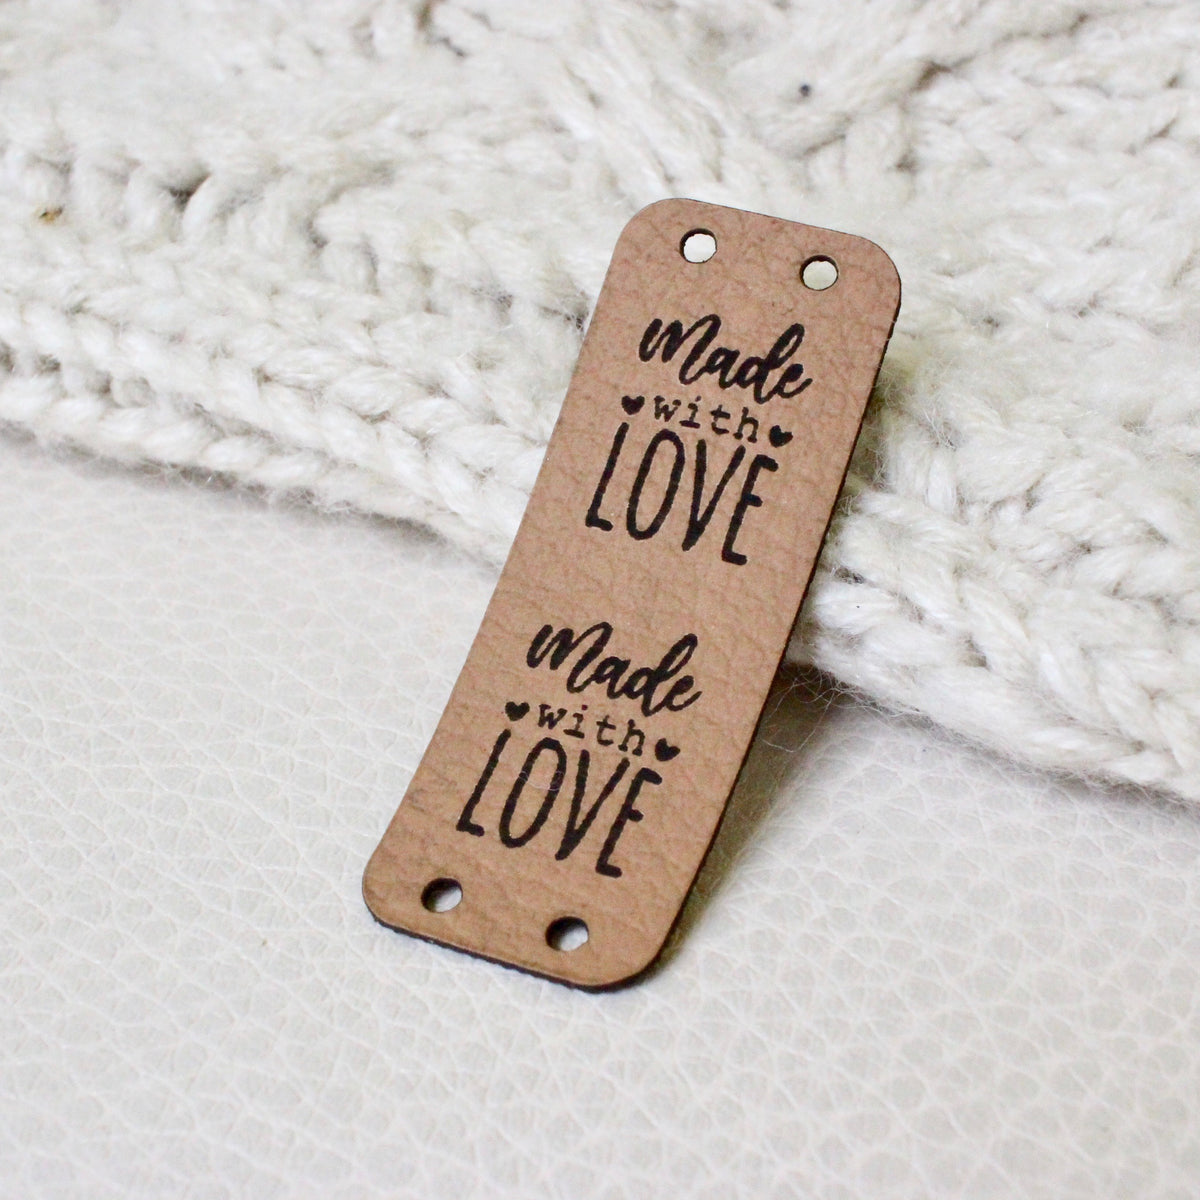 Handmade Label Tag Sewing, Label Leather Made Love